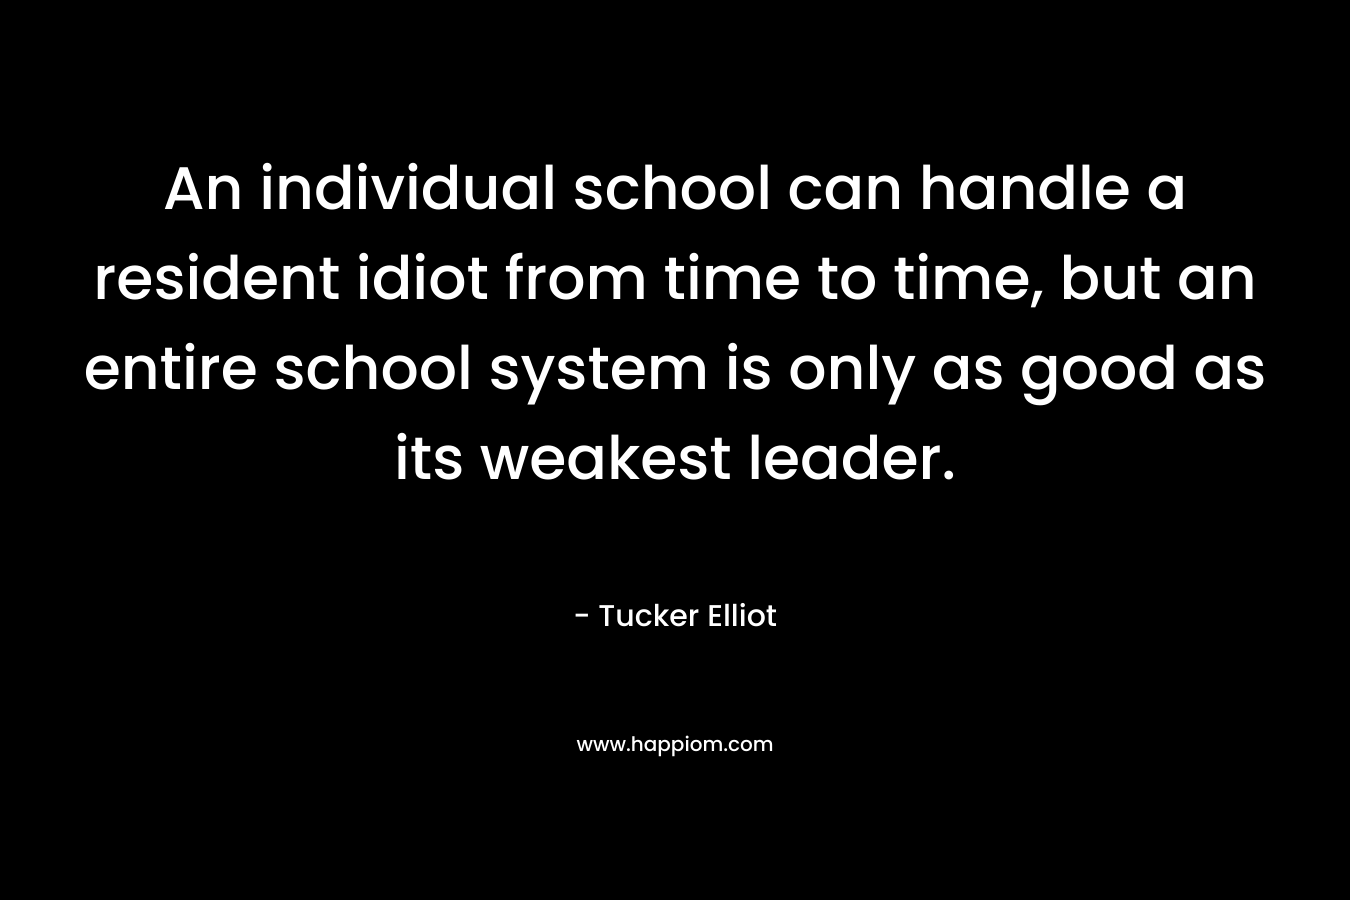 An individual school can handle a resident idiot from time to time, but an entire school system is only as good as its weakest leader. – Tucker Elliot